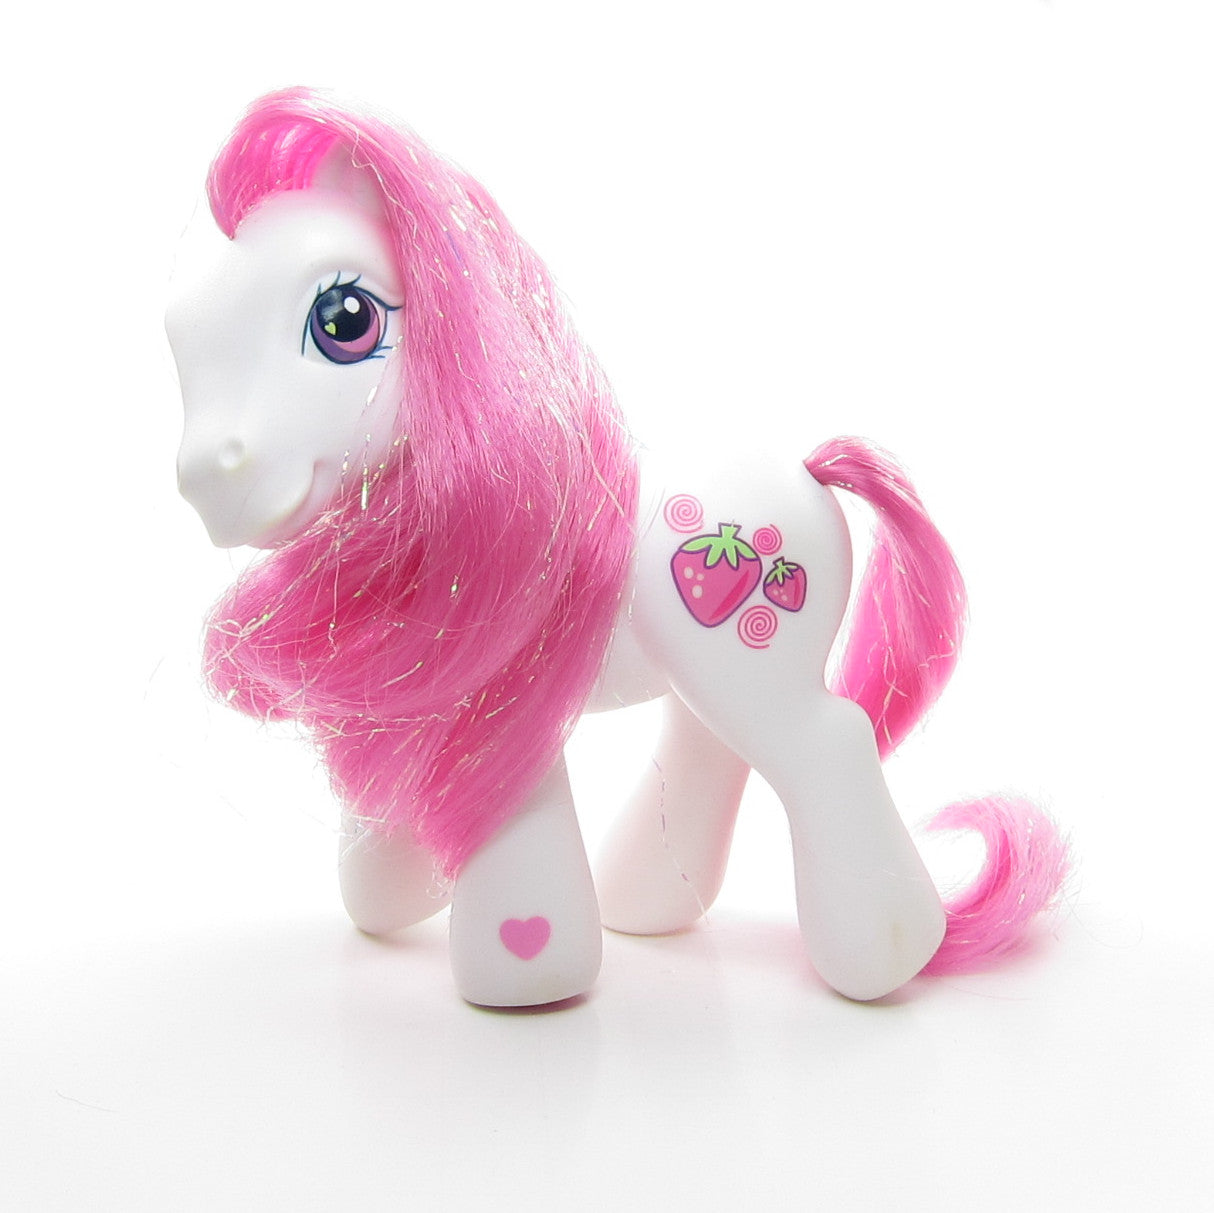 Strawberry Swirl G3 My Little Pony from Let's Go purse set